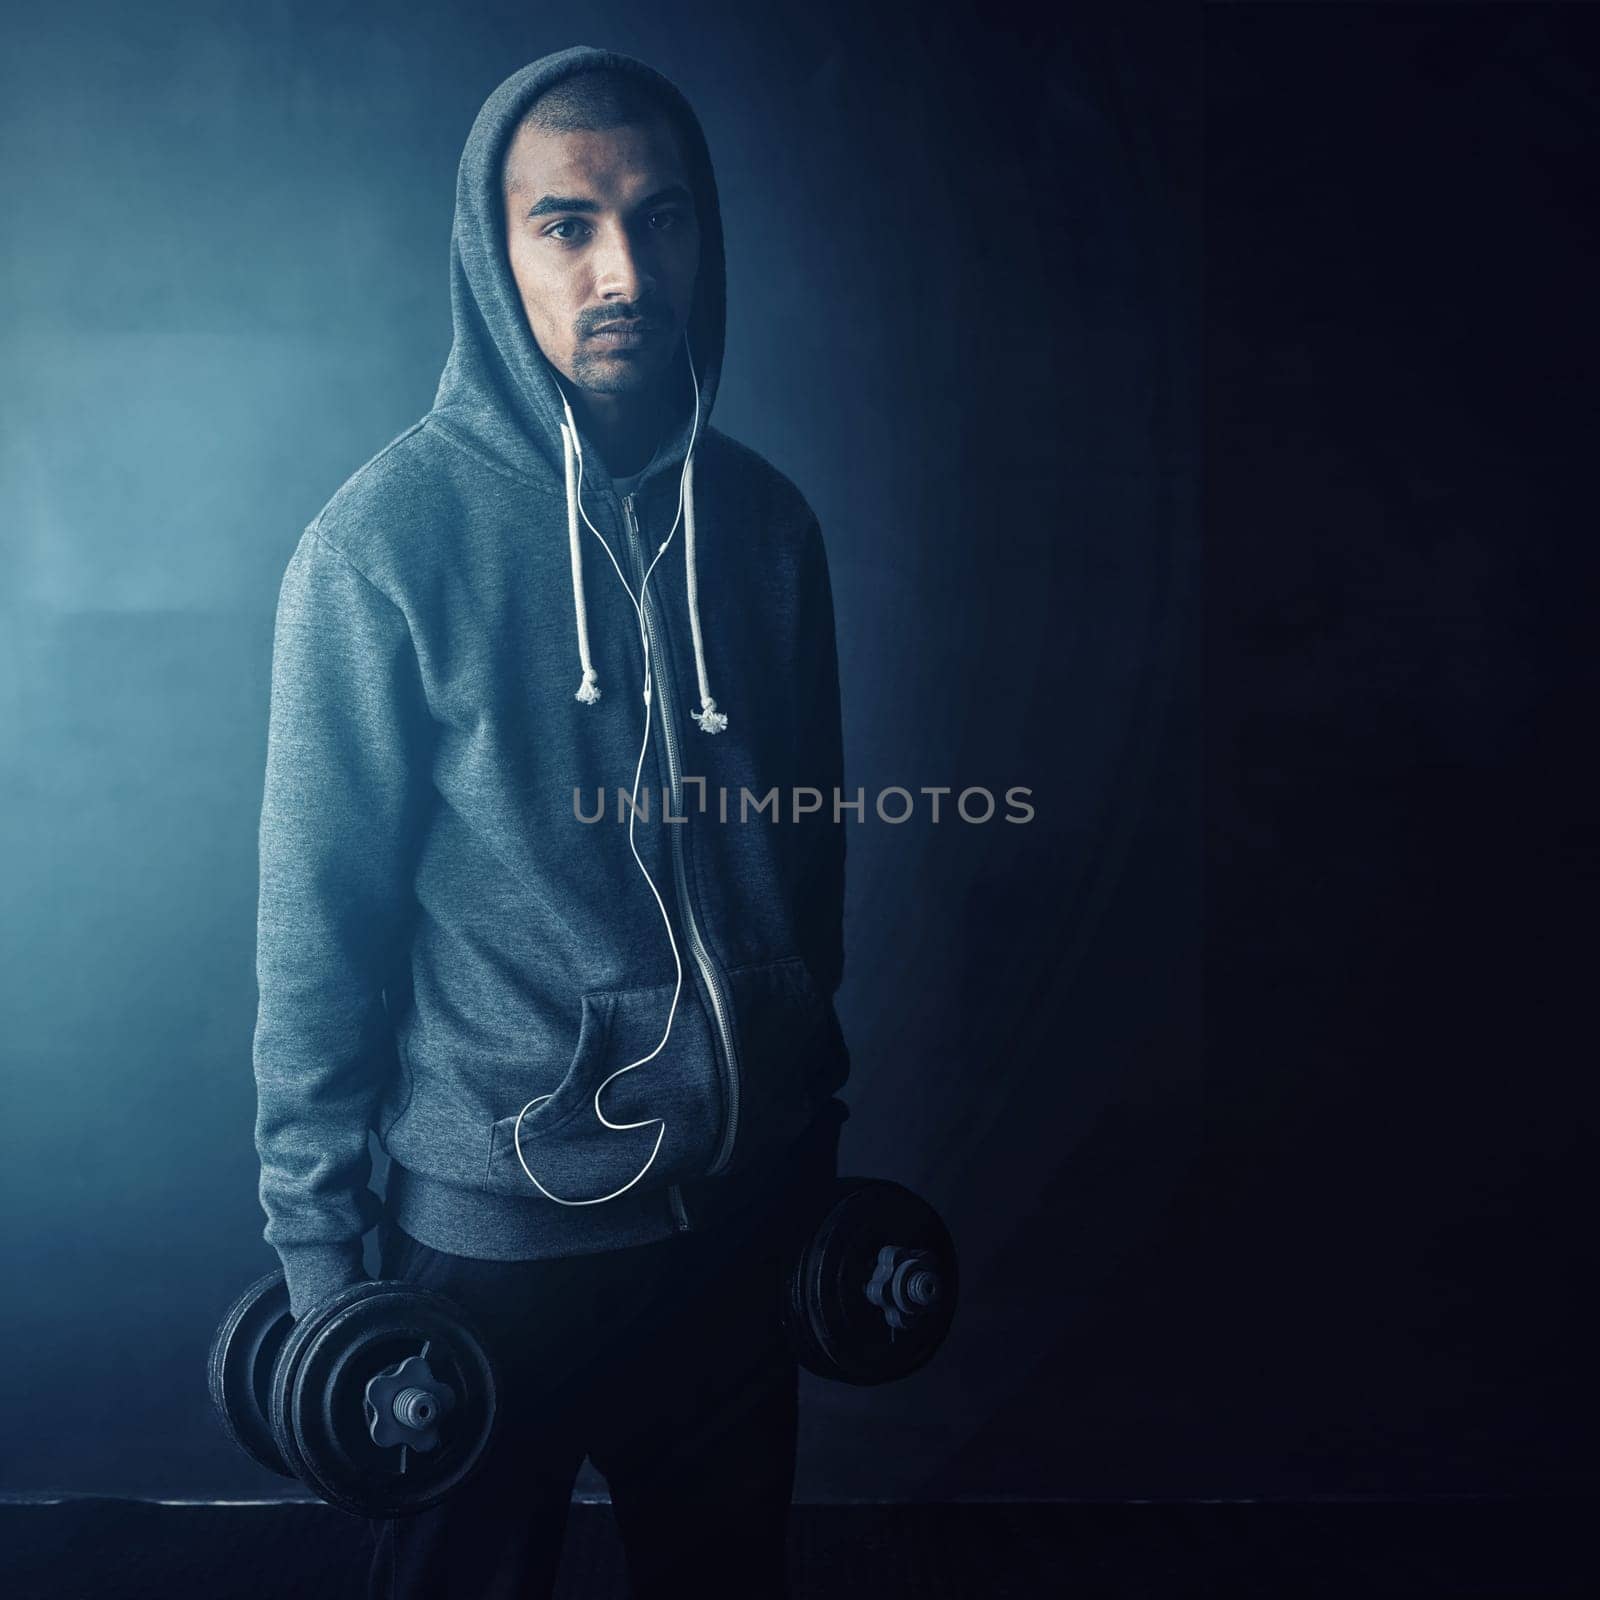 I stay strong. Studio portrait of a young man working out against a dark background